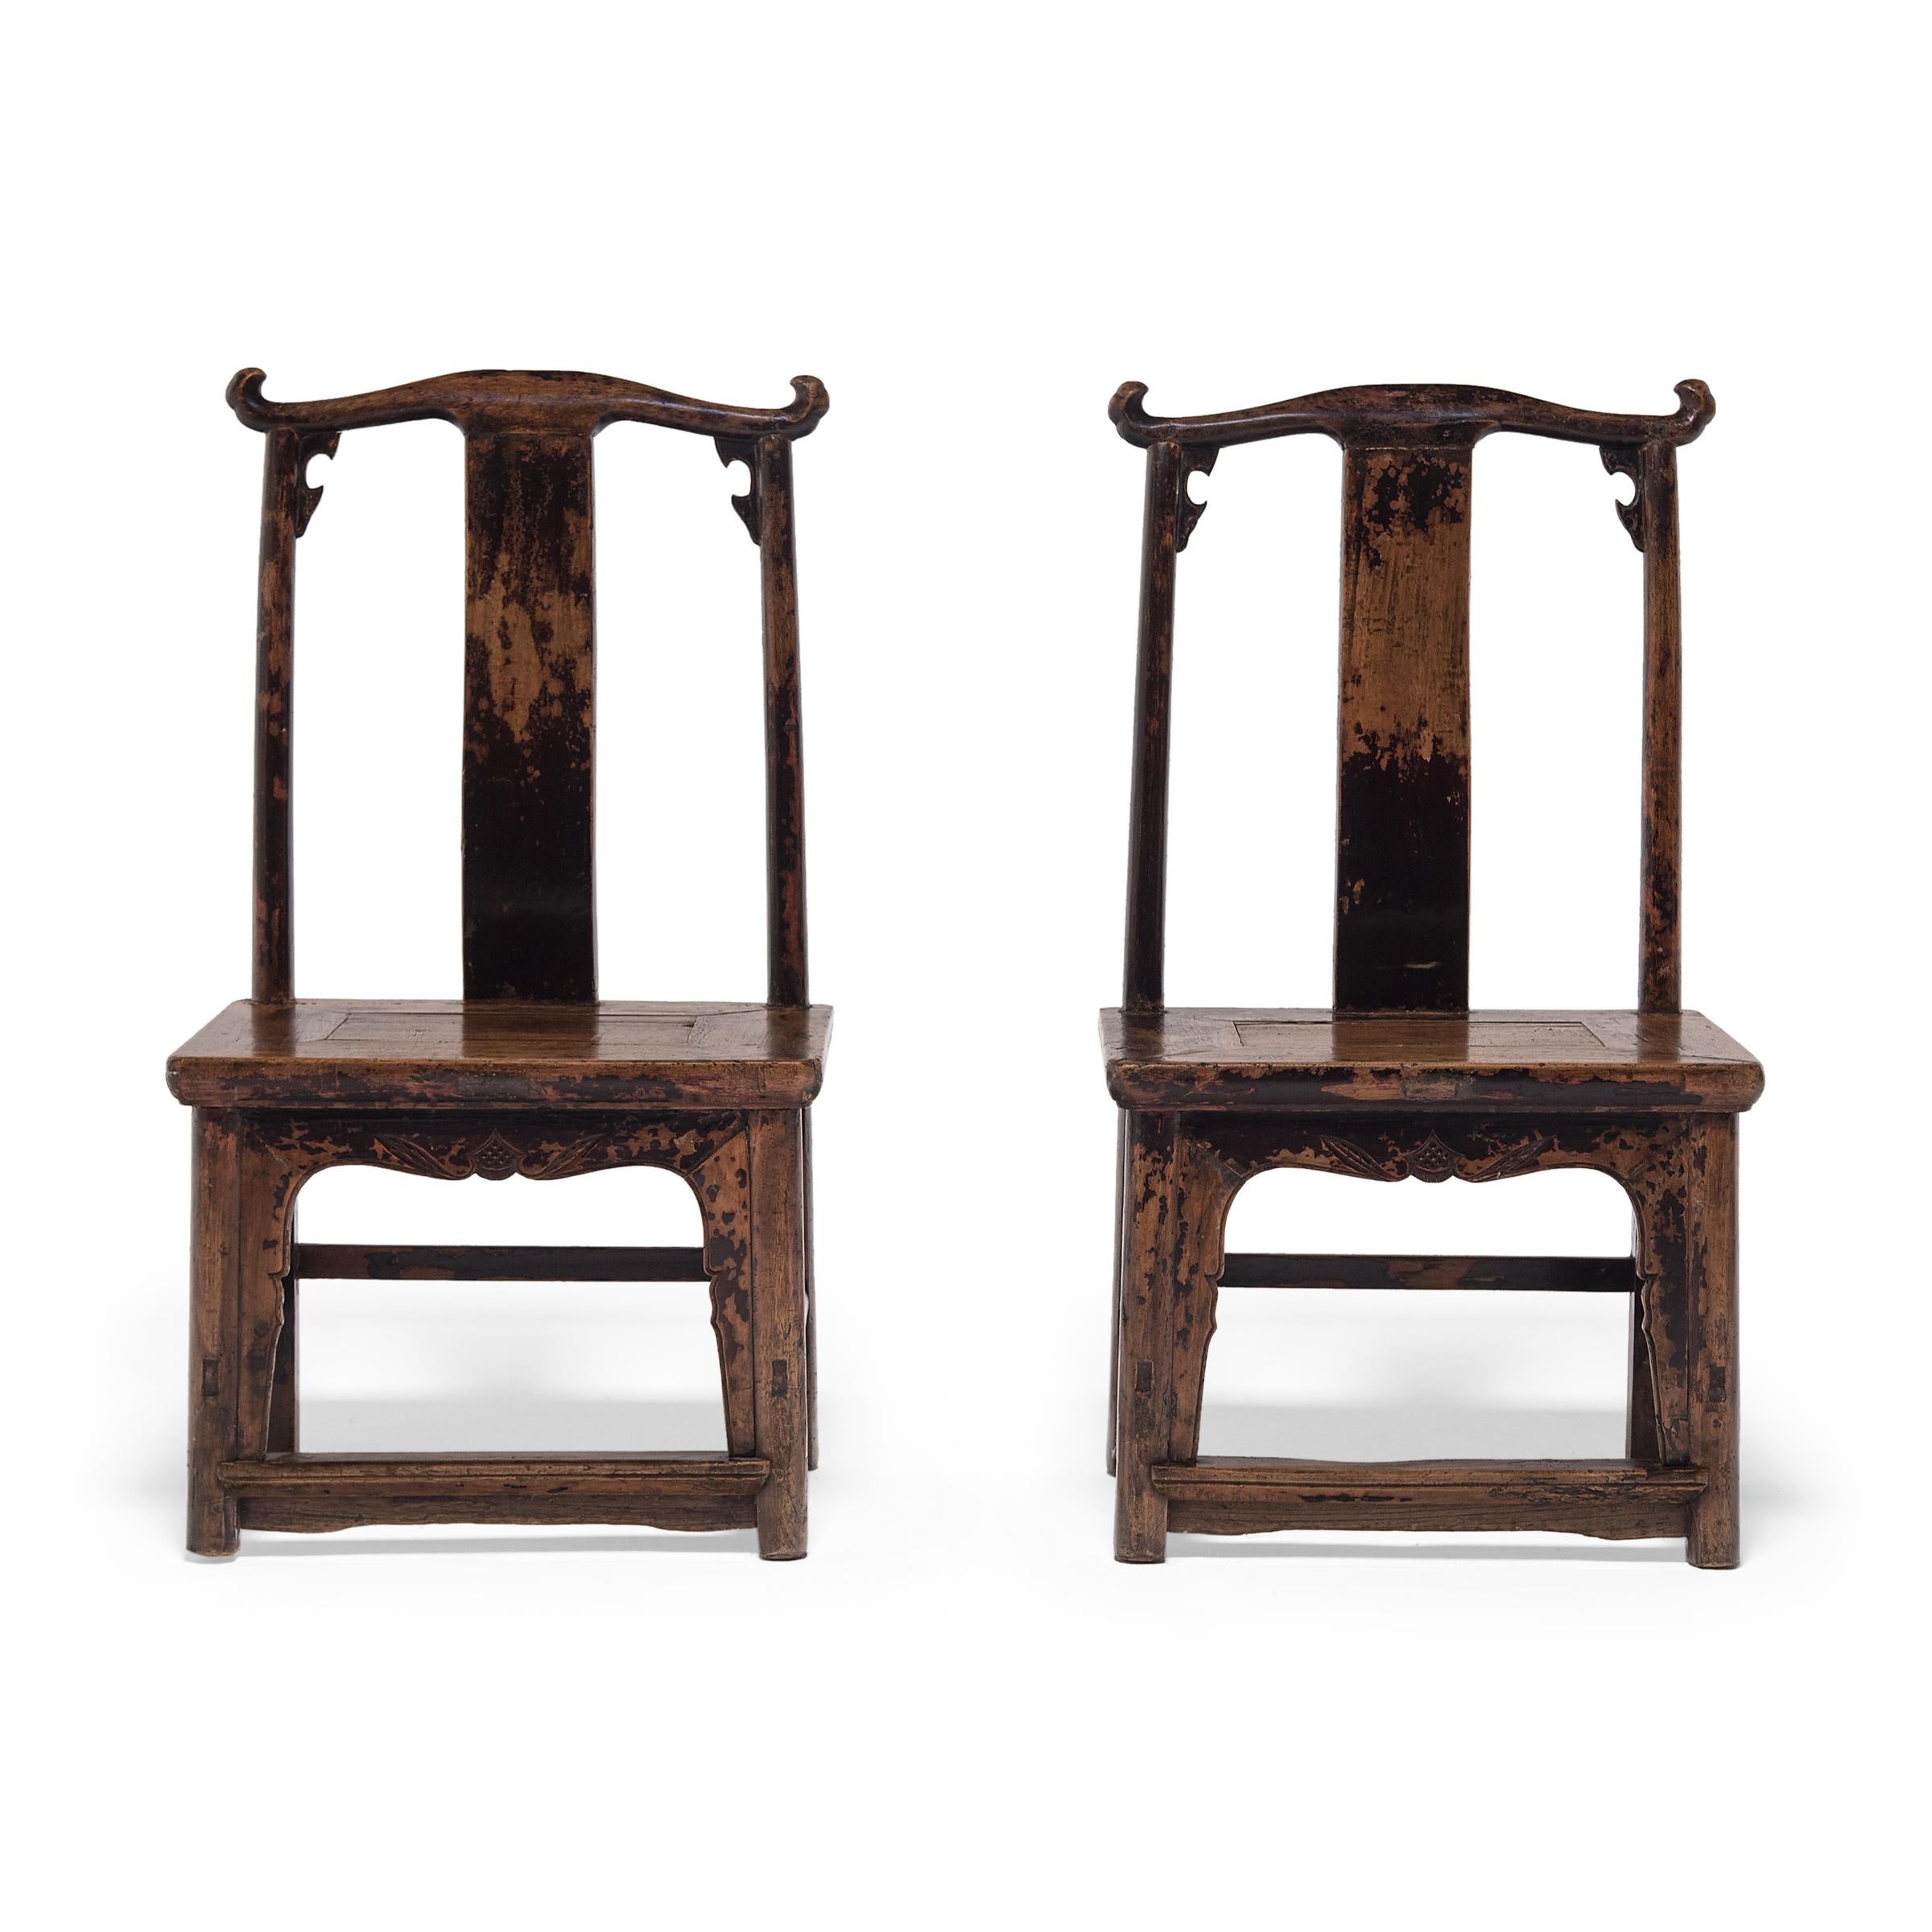 These low children's chairs from northern China are designed in a traditional style known as a 